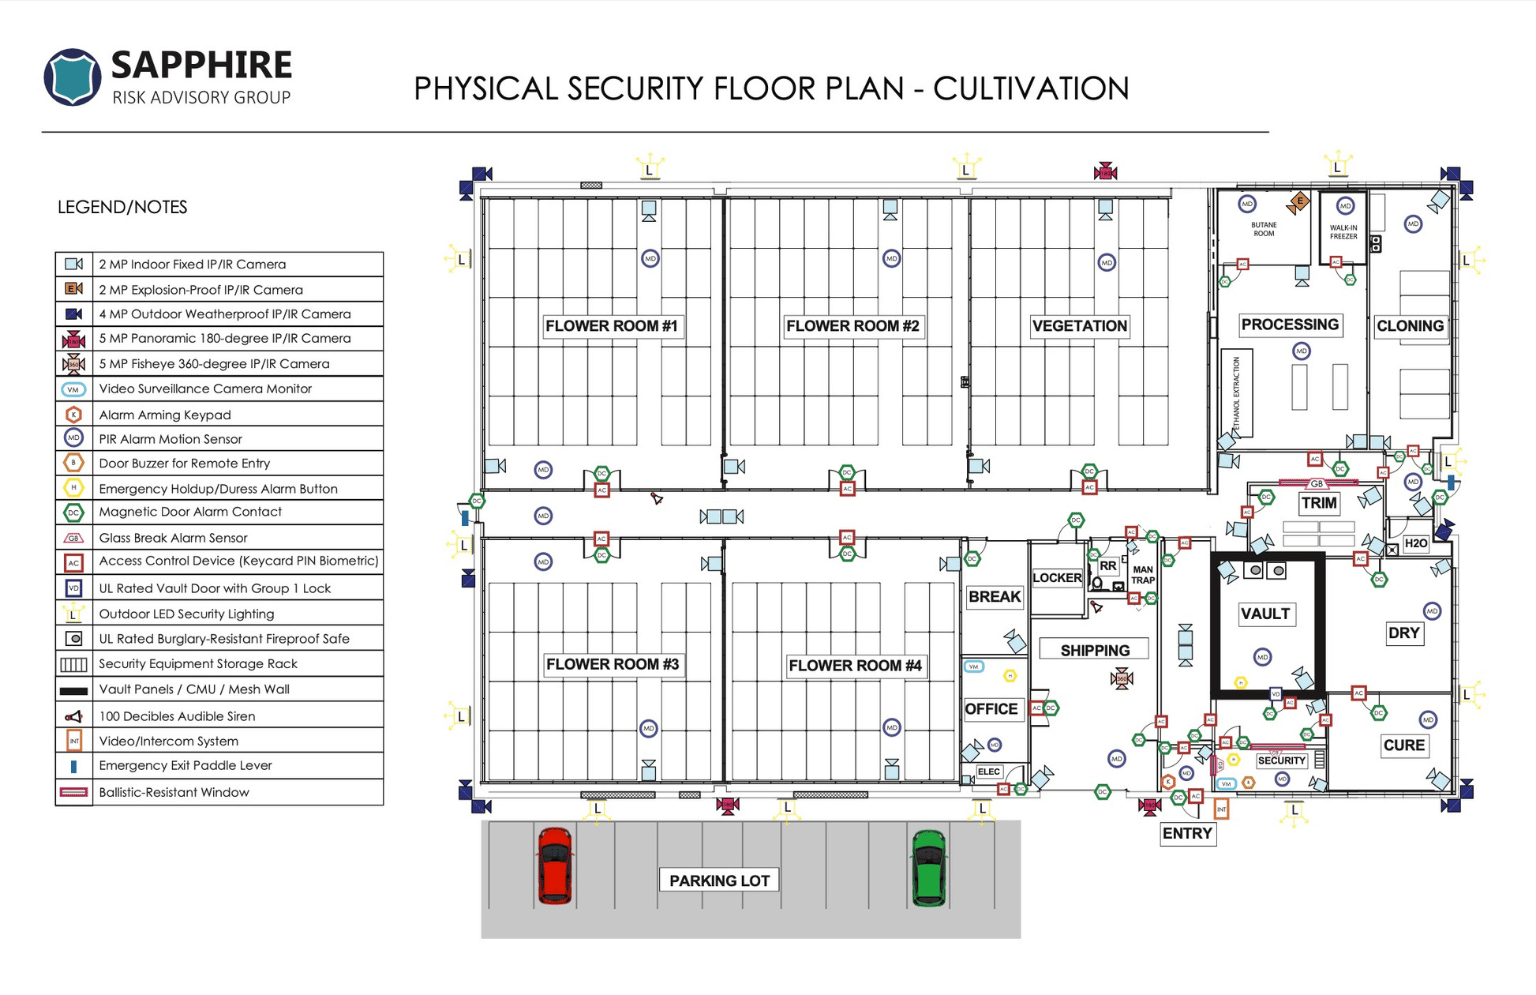 Sapphire Risk - Physical Security Floor Plan Cultivation Facility